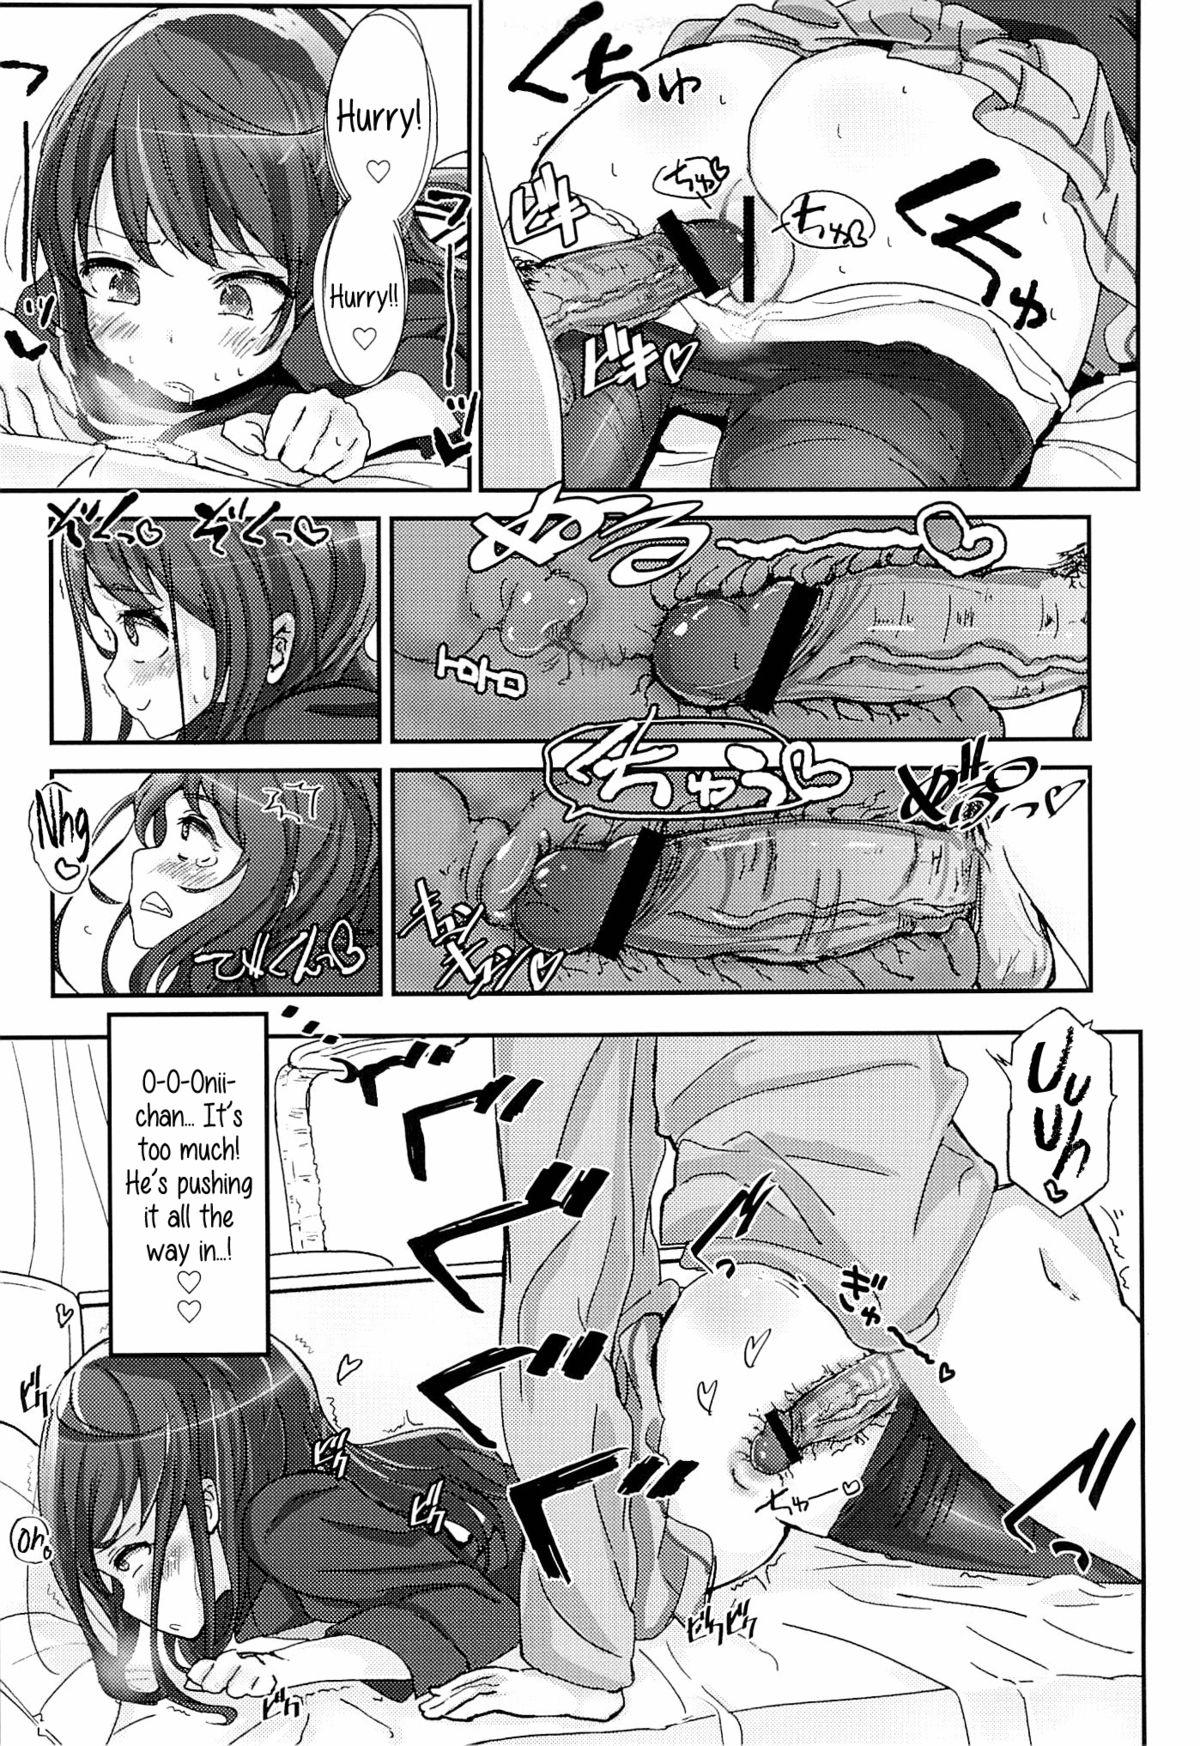 Amatuer Shikyuukou no Kanata, Onii chan no Hate | Beyond the mouth of the uterus lies Onii-chan’s demise Selfie - Page 6